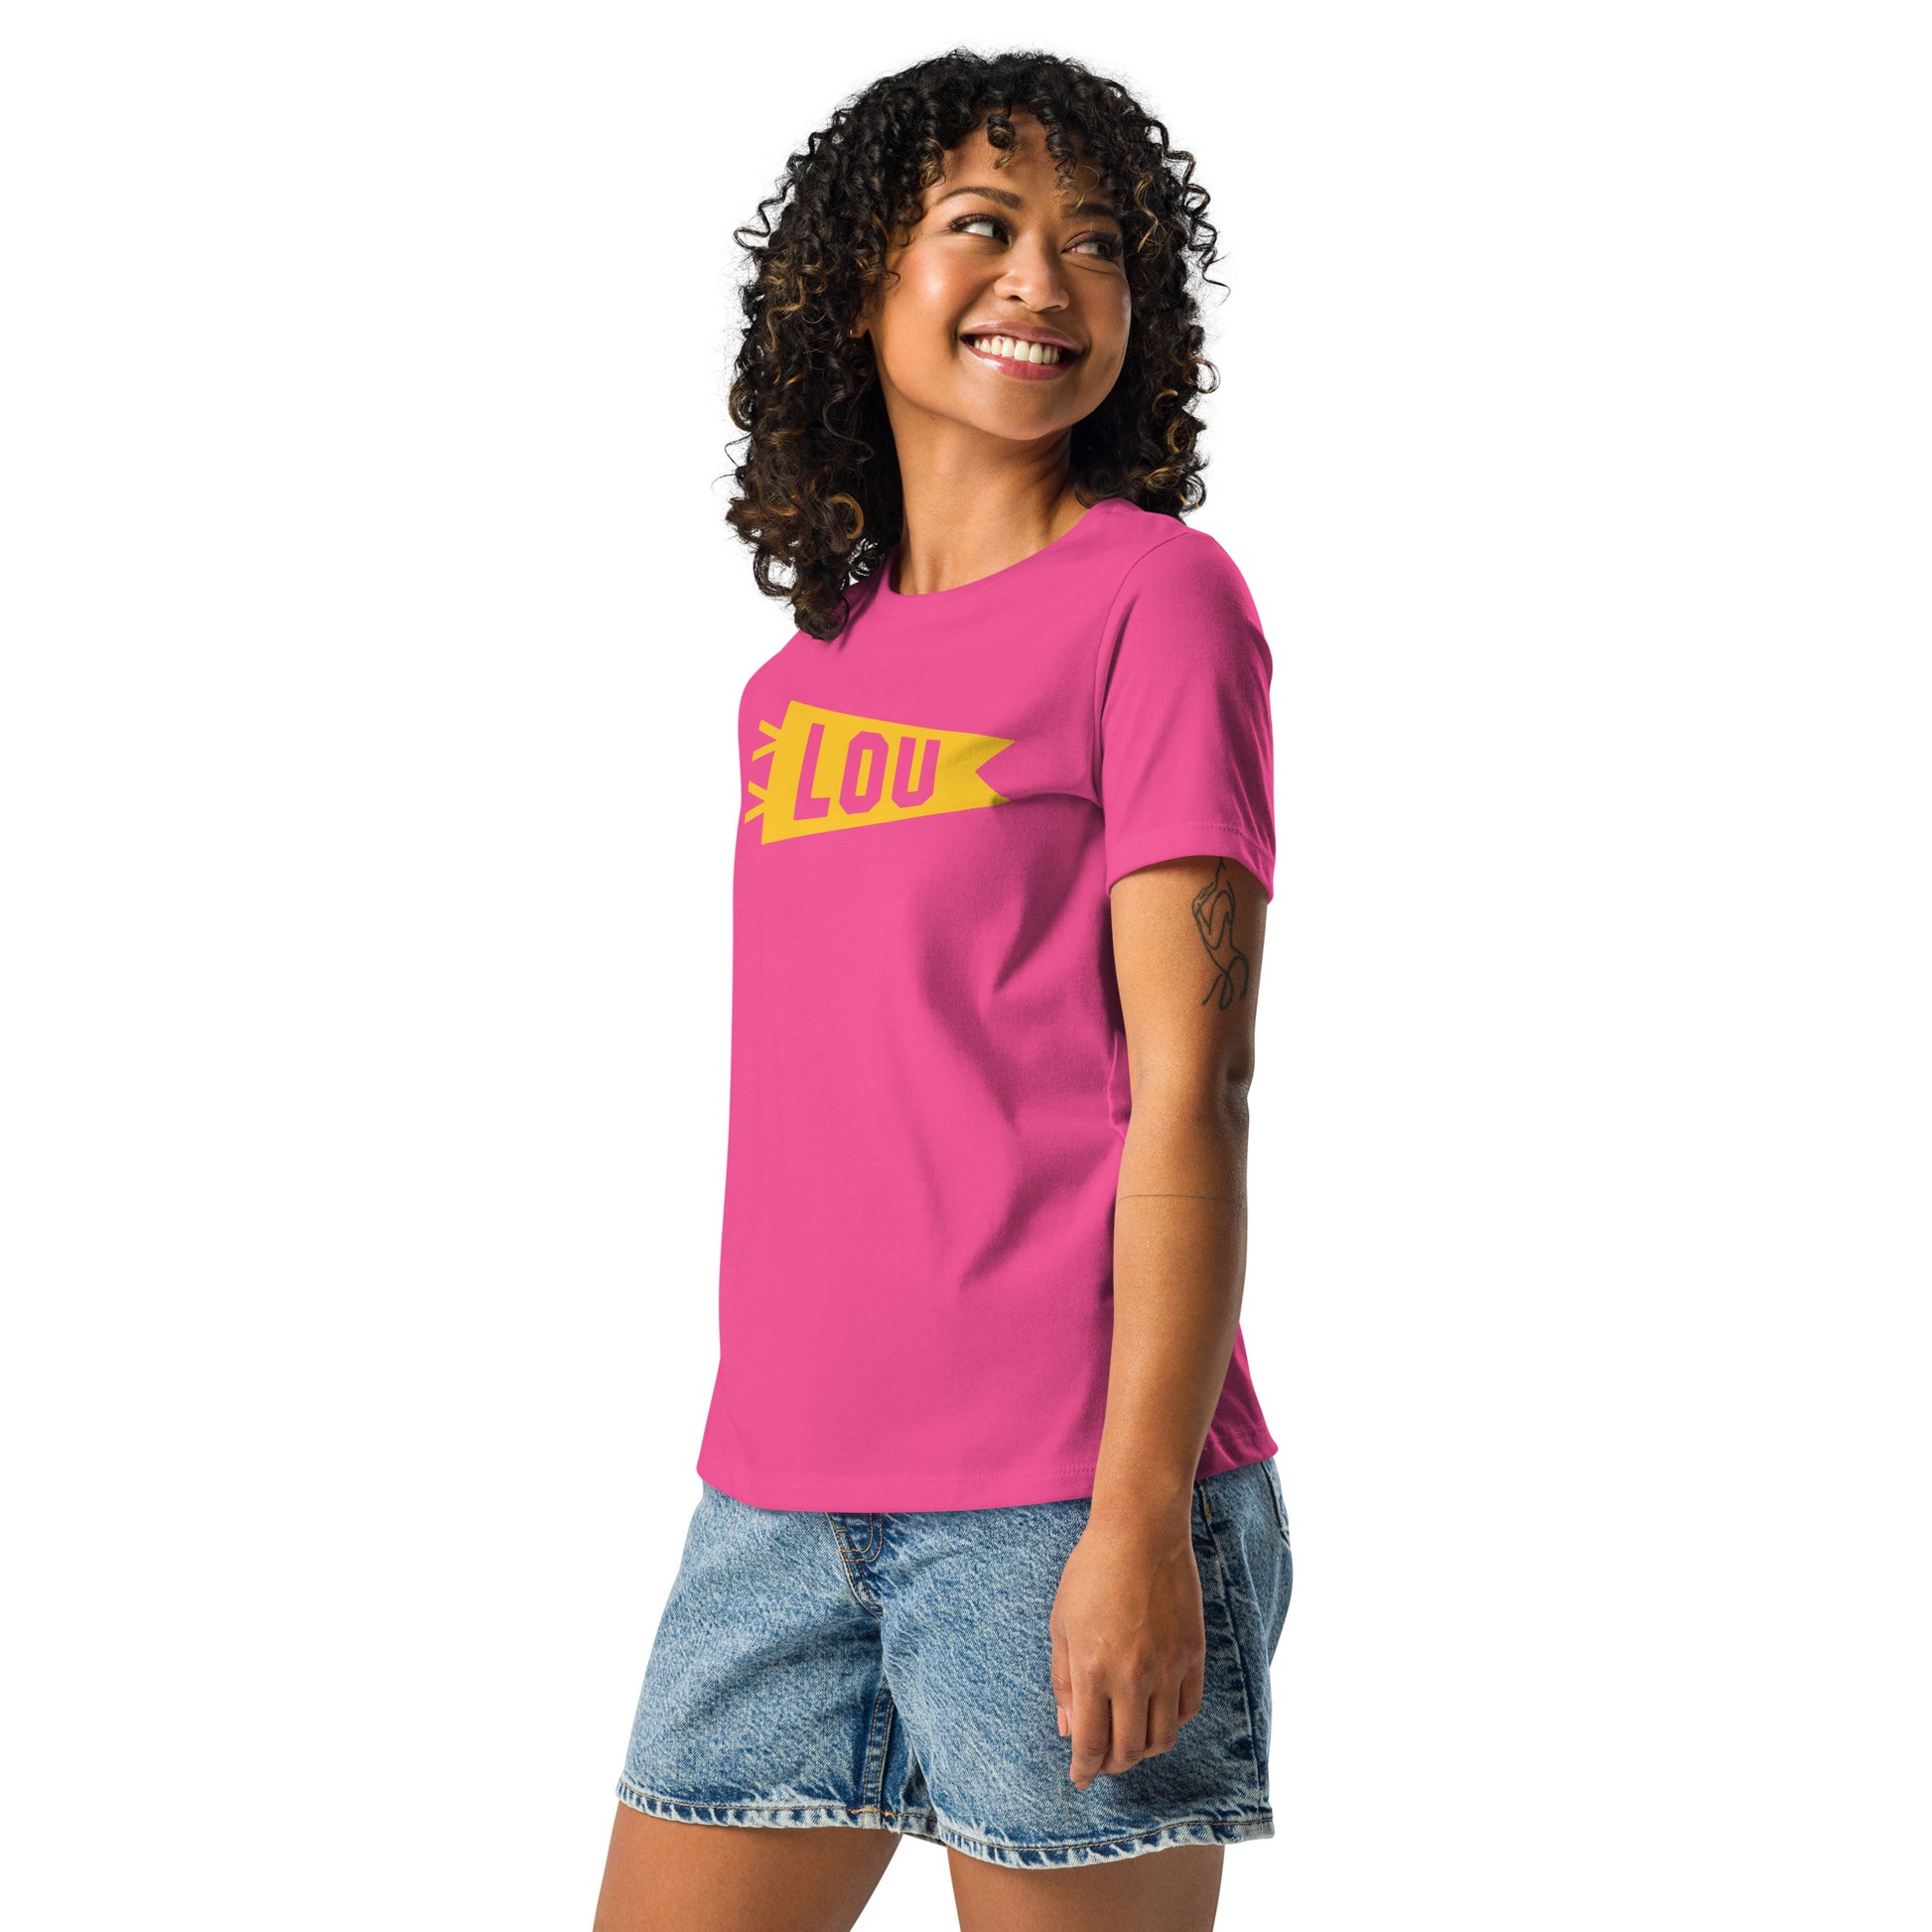 Airport Code Women's Tee - Yellow Graphic • LOU Louisville • YHM Designs - Image 06